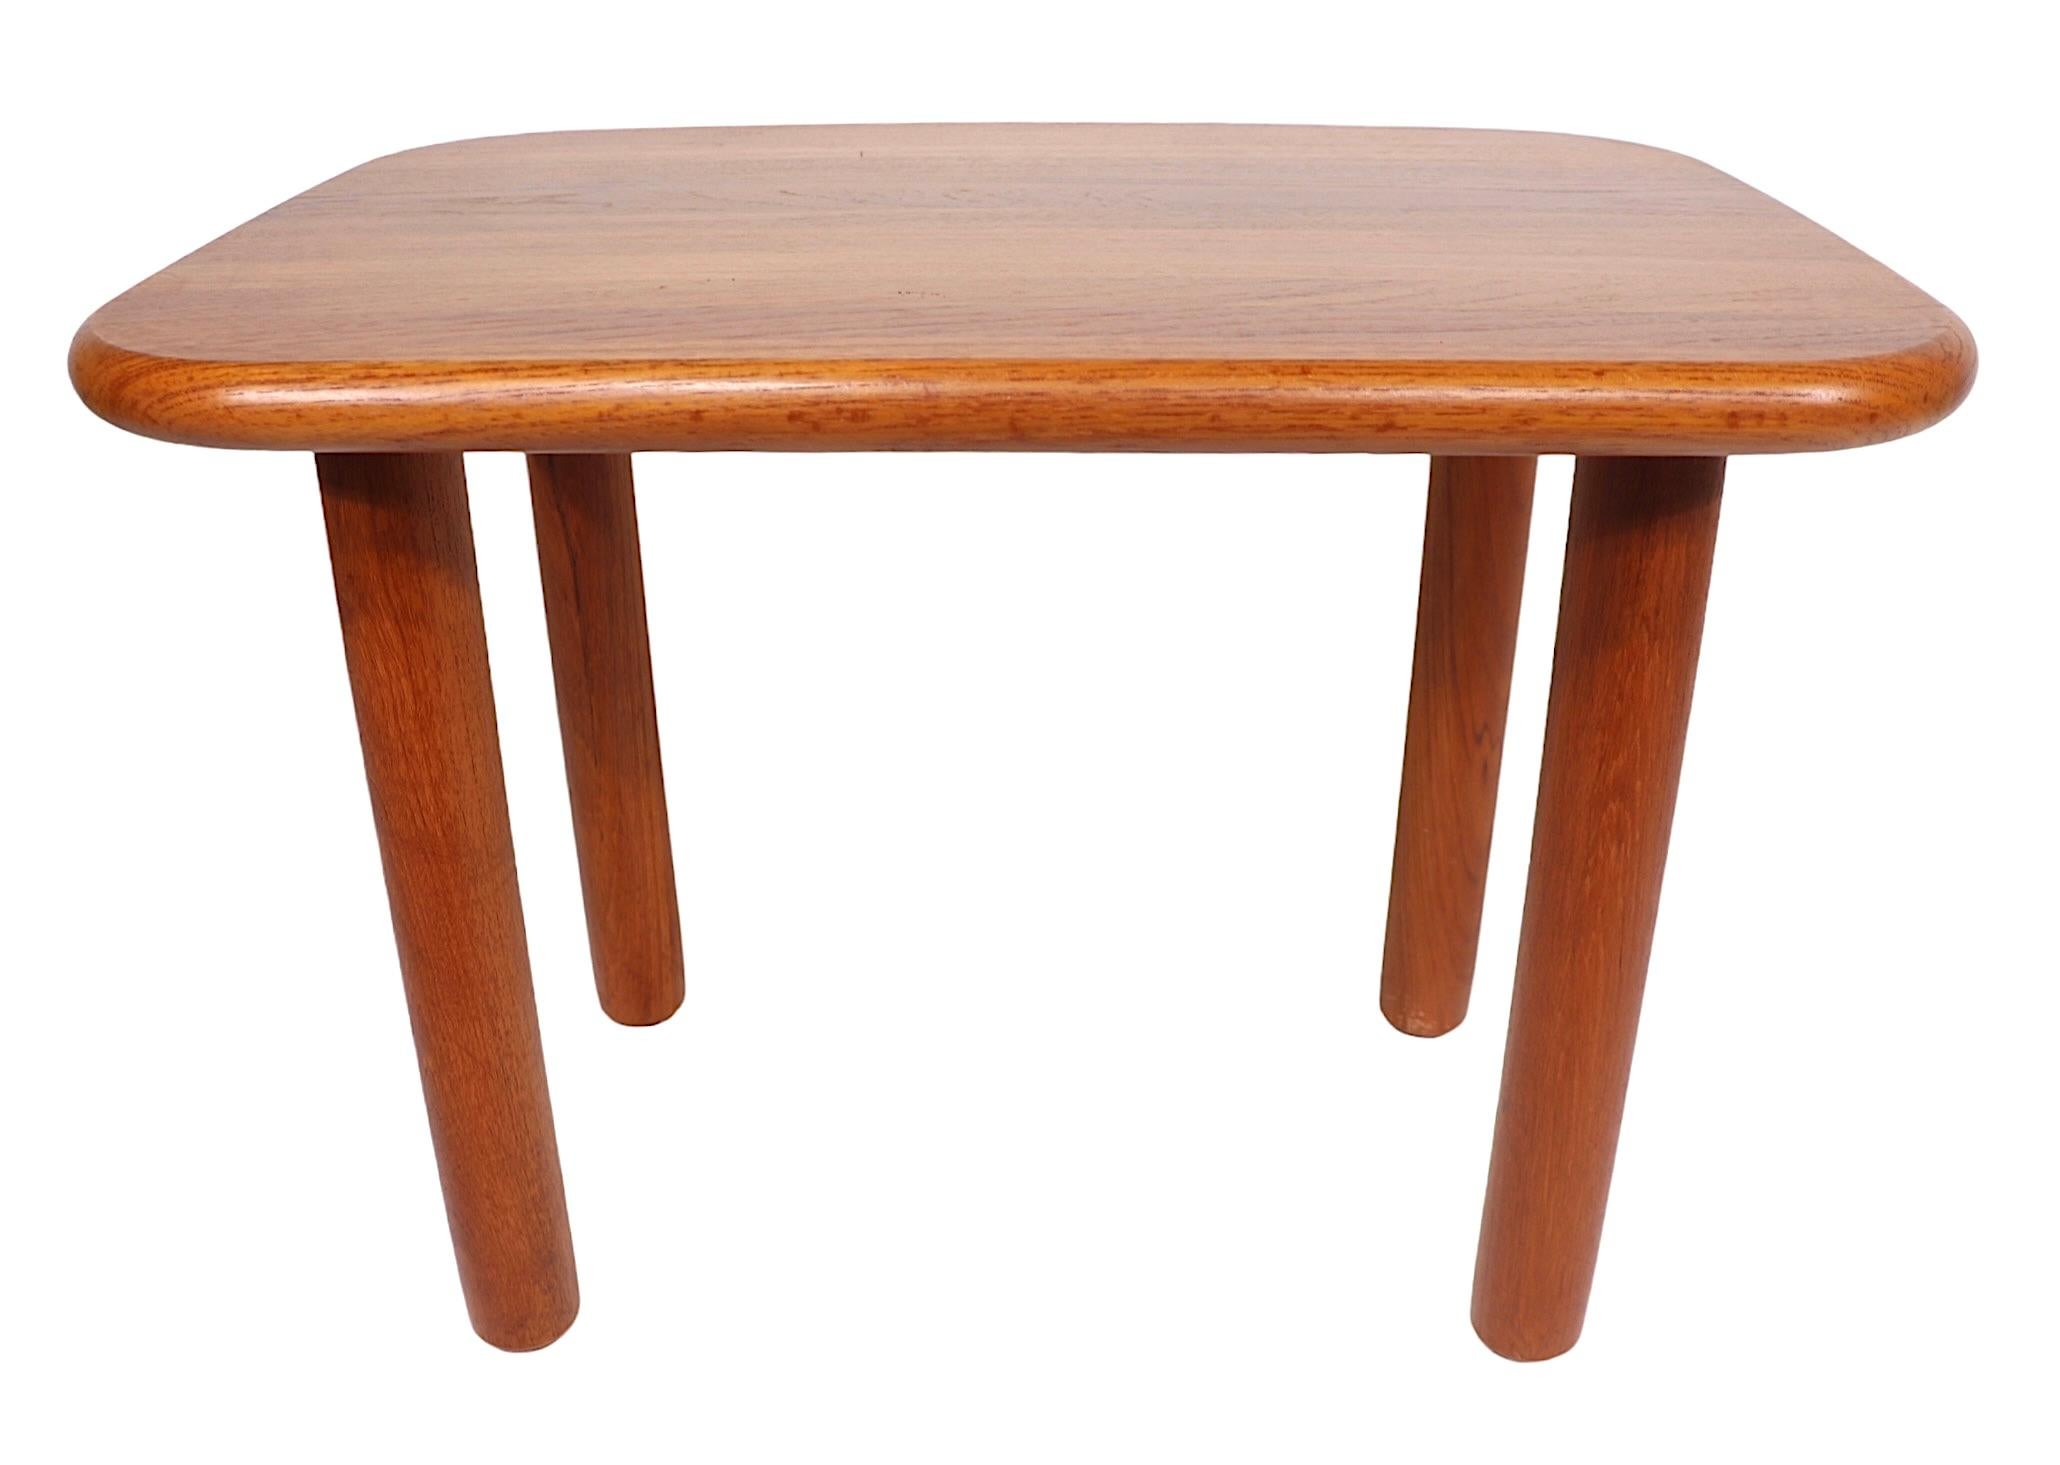  1970's Danish Modern Teak  End Table by Neils Bach  For Sale 2